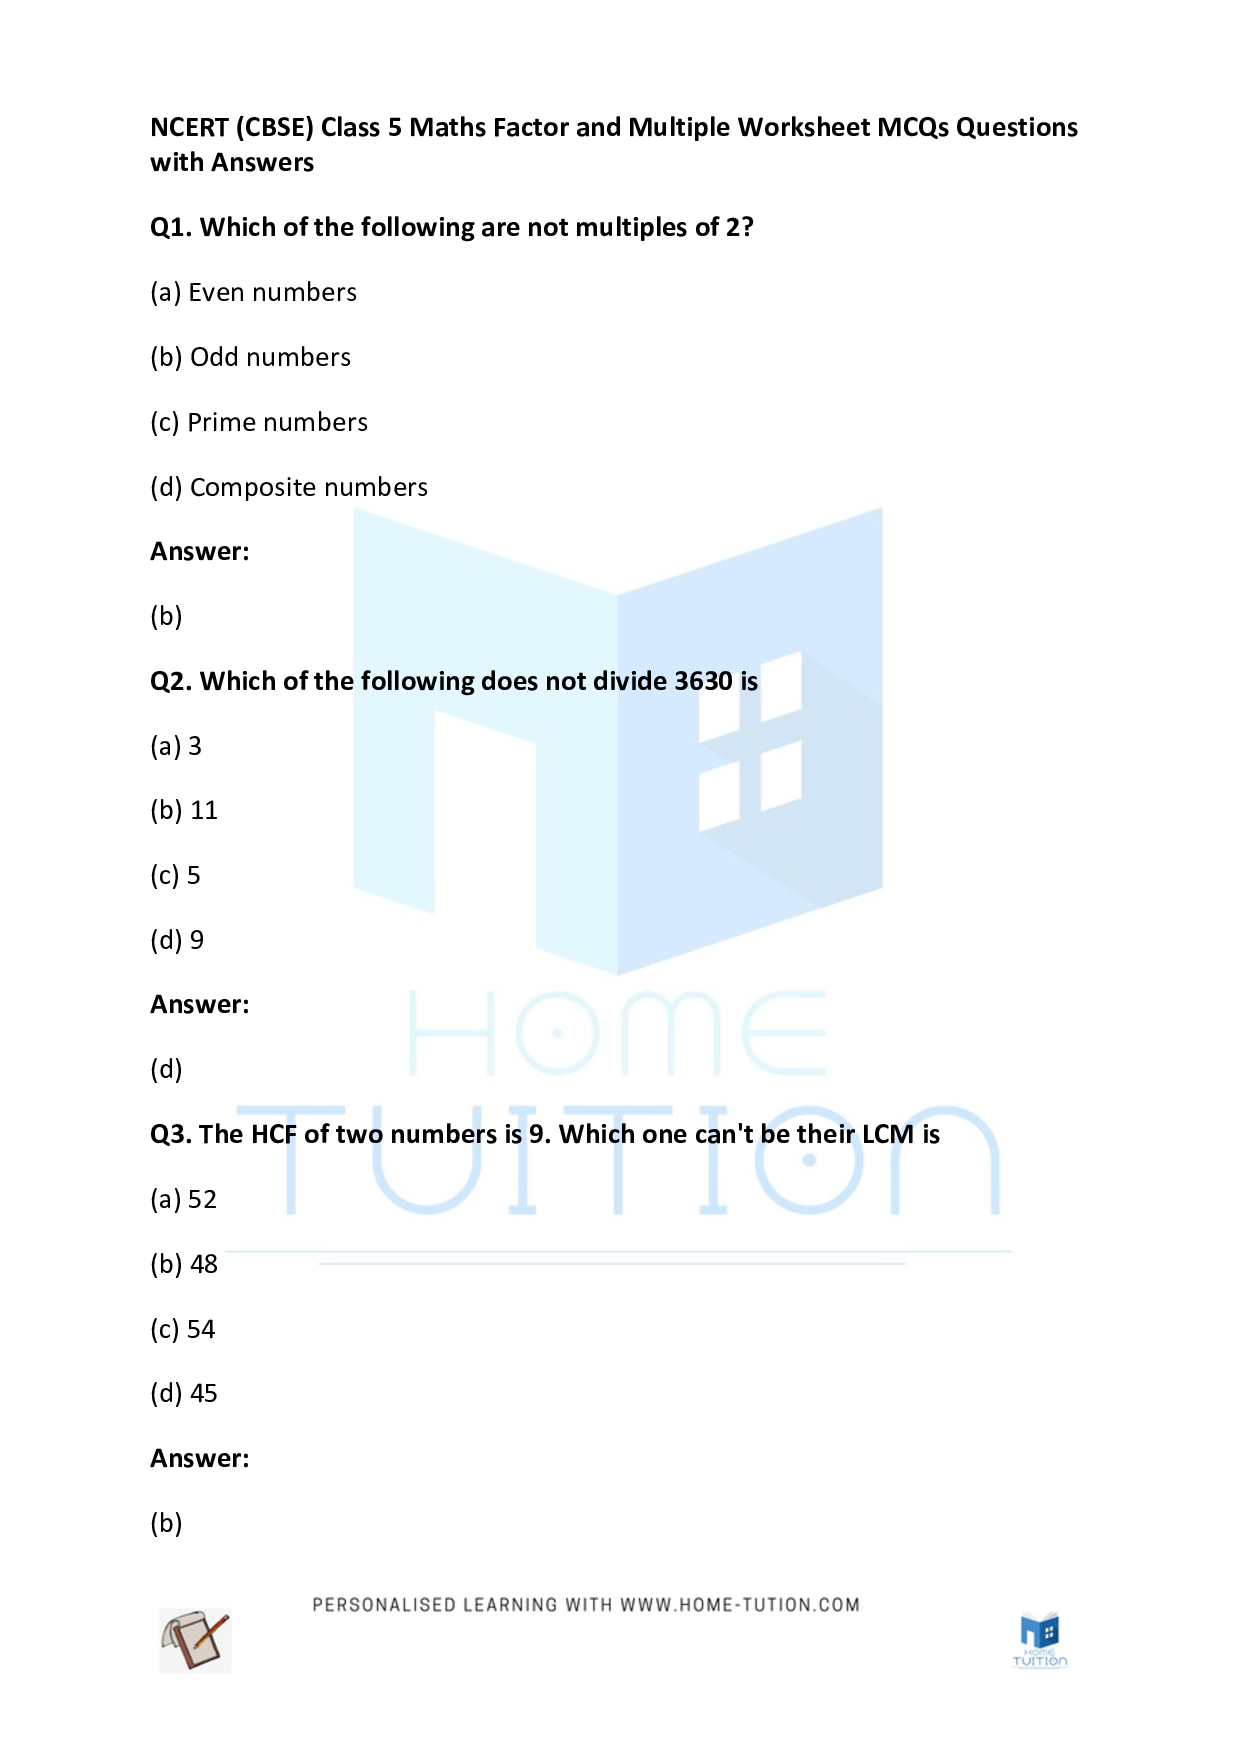 CBSE Class 5 Maths Factor and Multiple Worksheet with Answers PDF 